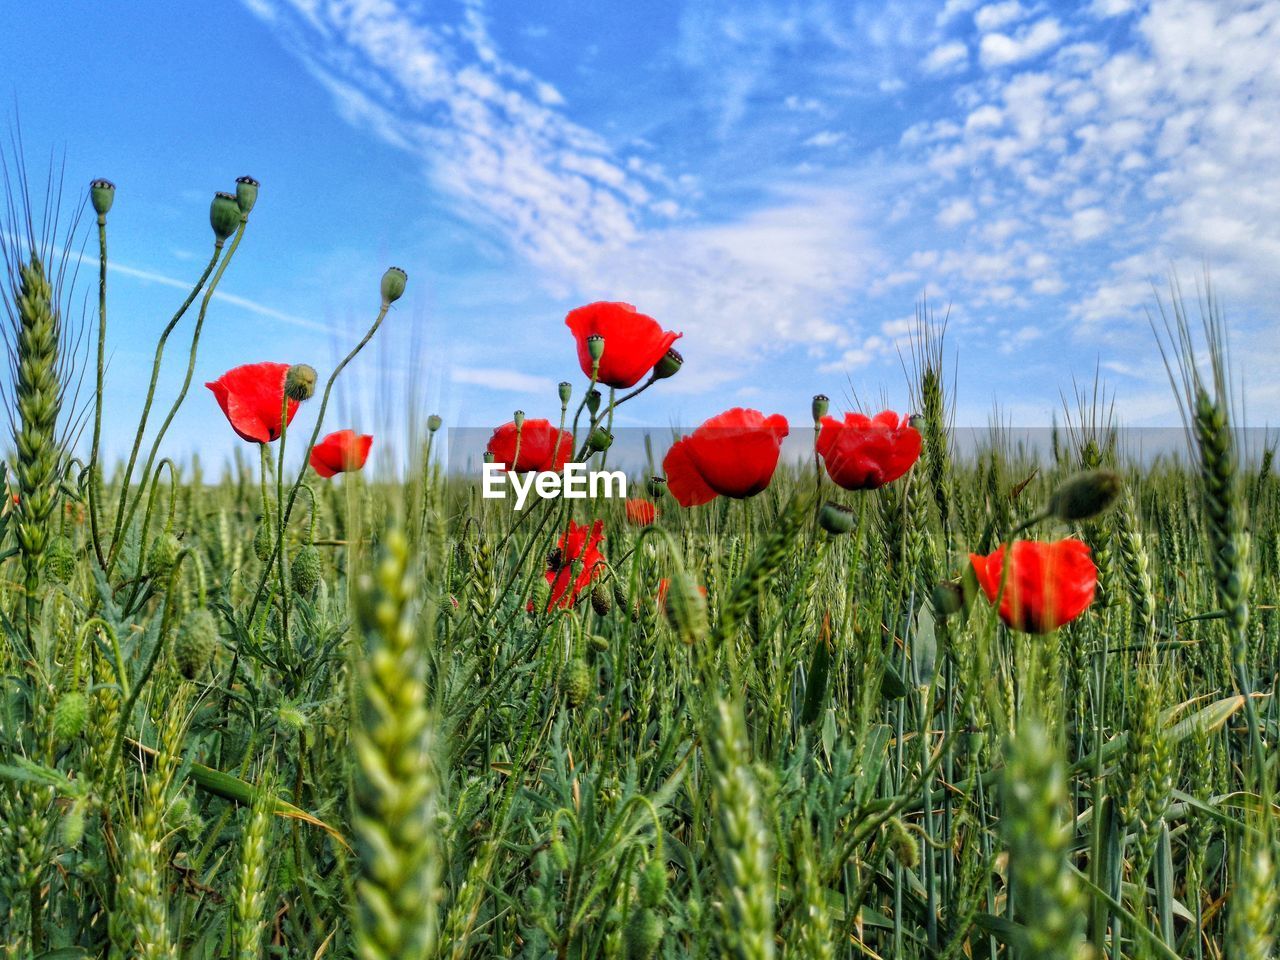 plant, red, flower, sky, nature, flowering plant, poppy, beauty in nature, field, land, cloud, landscape, growth, grass, freshness, meadow, environment, rural scene, no people, cereal plant, blue, tranquility, grassland, fragility, outdoors, green, springtime, day, crop, agriculture, flower head, petal, close-up, scenics - nature, wildflower, inflorescence, summer, prairie, sunlight, barley, tranquil scene, multi colored, vibrant color, plain, plant stem